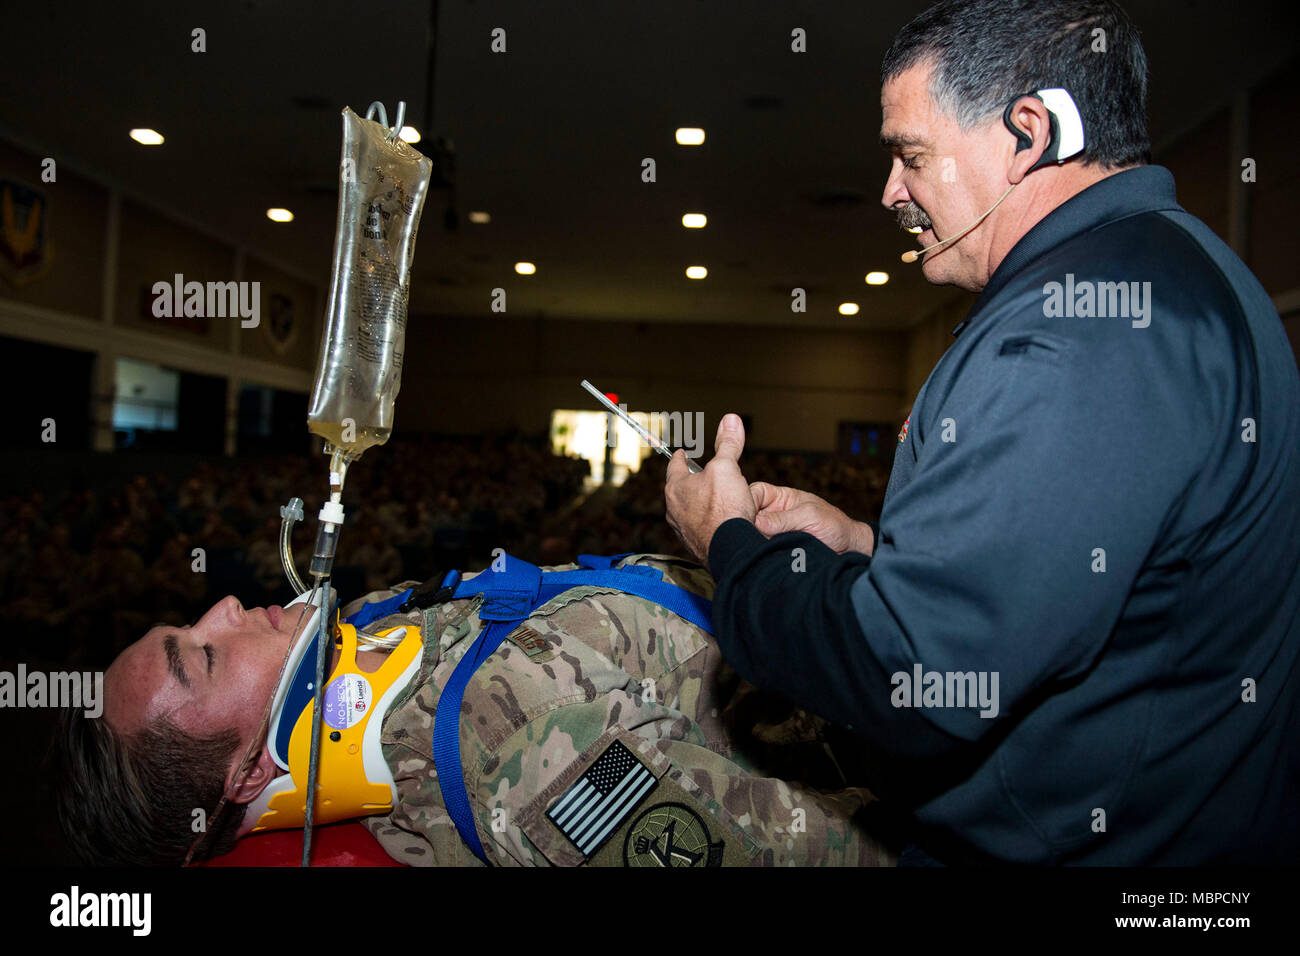 Ronny Garcia, right, safety training coordinator, demonstrates the actions taken using life-saving equipment on Senior Airman Cody Stoltenburg, 71st Rescue Squadron intelligence analyst, during a Street Smart presentation, Jan. 2, 2018, at Moody Air Force Base, Ga. The presenters utilized Airmen to simulate the potential results of drunk driving. Street Smart is a safety program designed to emphasize the dangers of making poor decisions and then driving a vehicle. (U.S. Air Force photo by Airman 1st Class Erick Requadt) Stock Photo